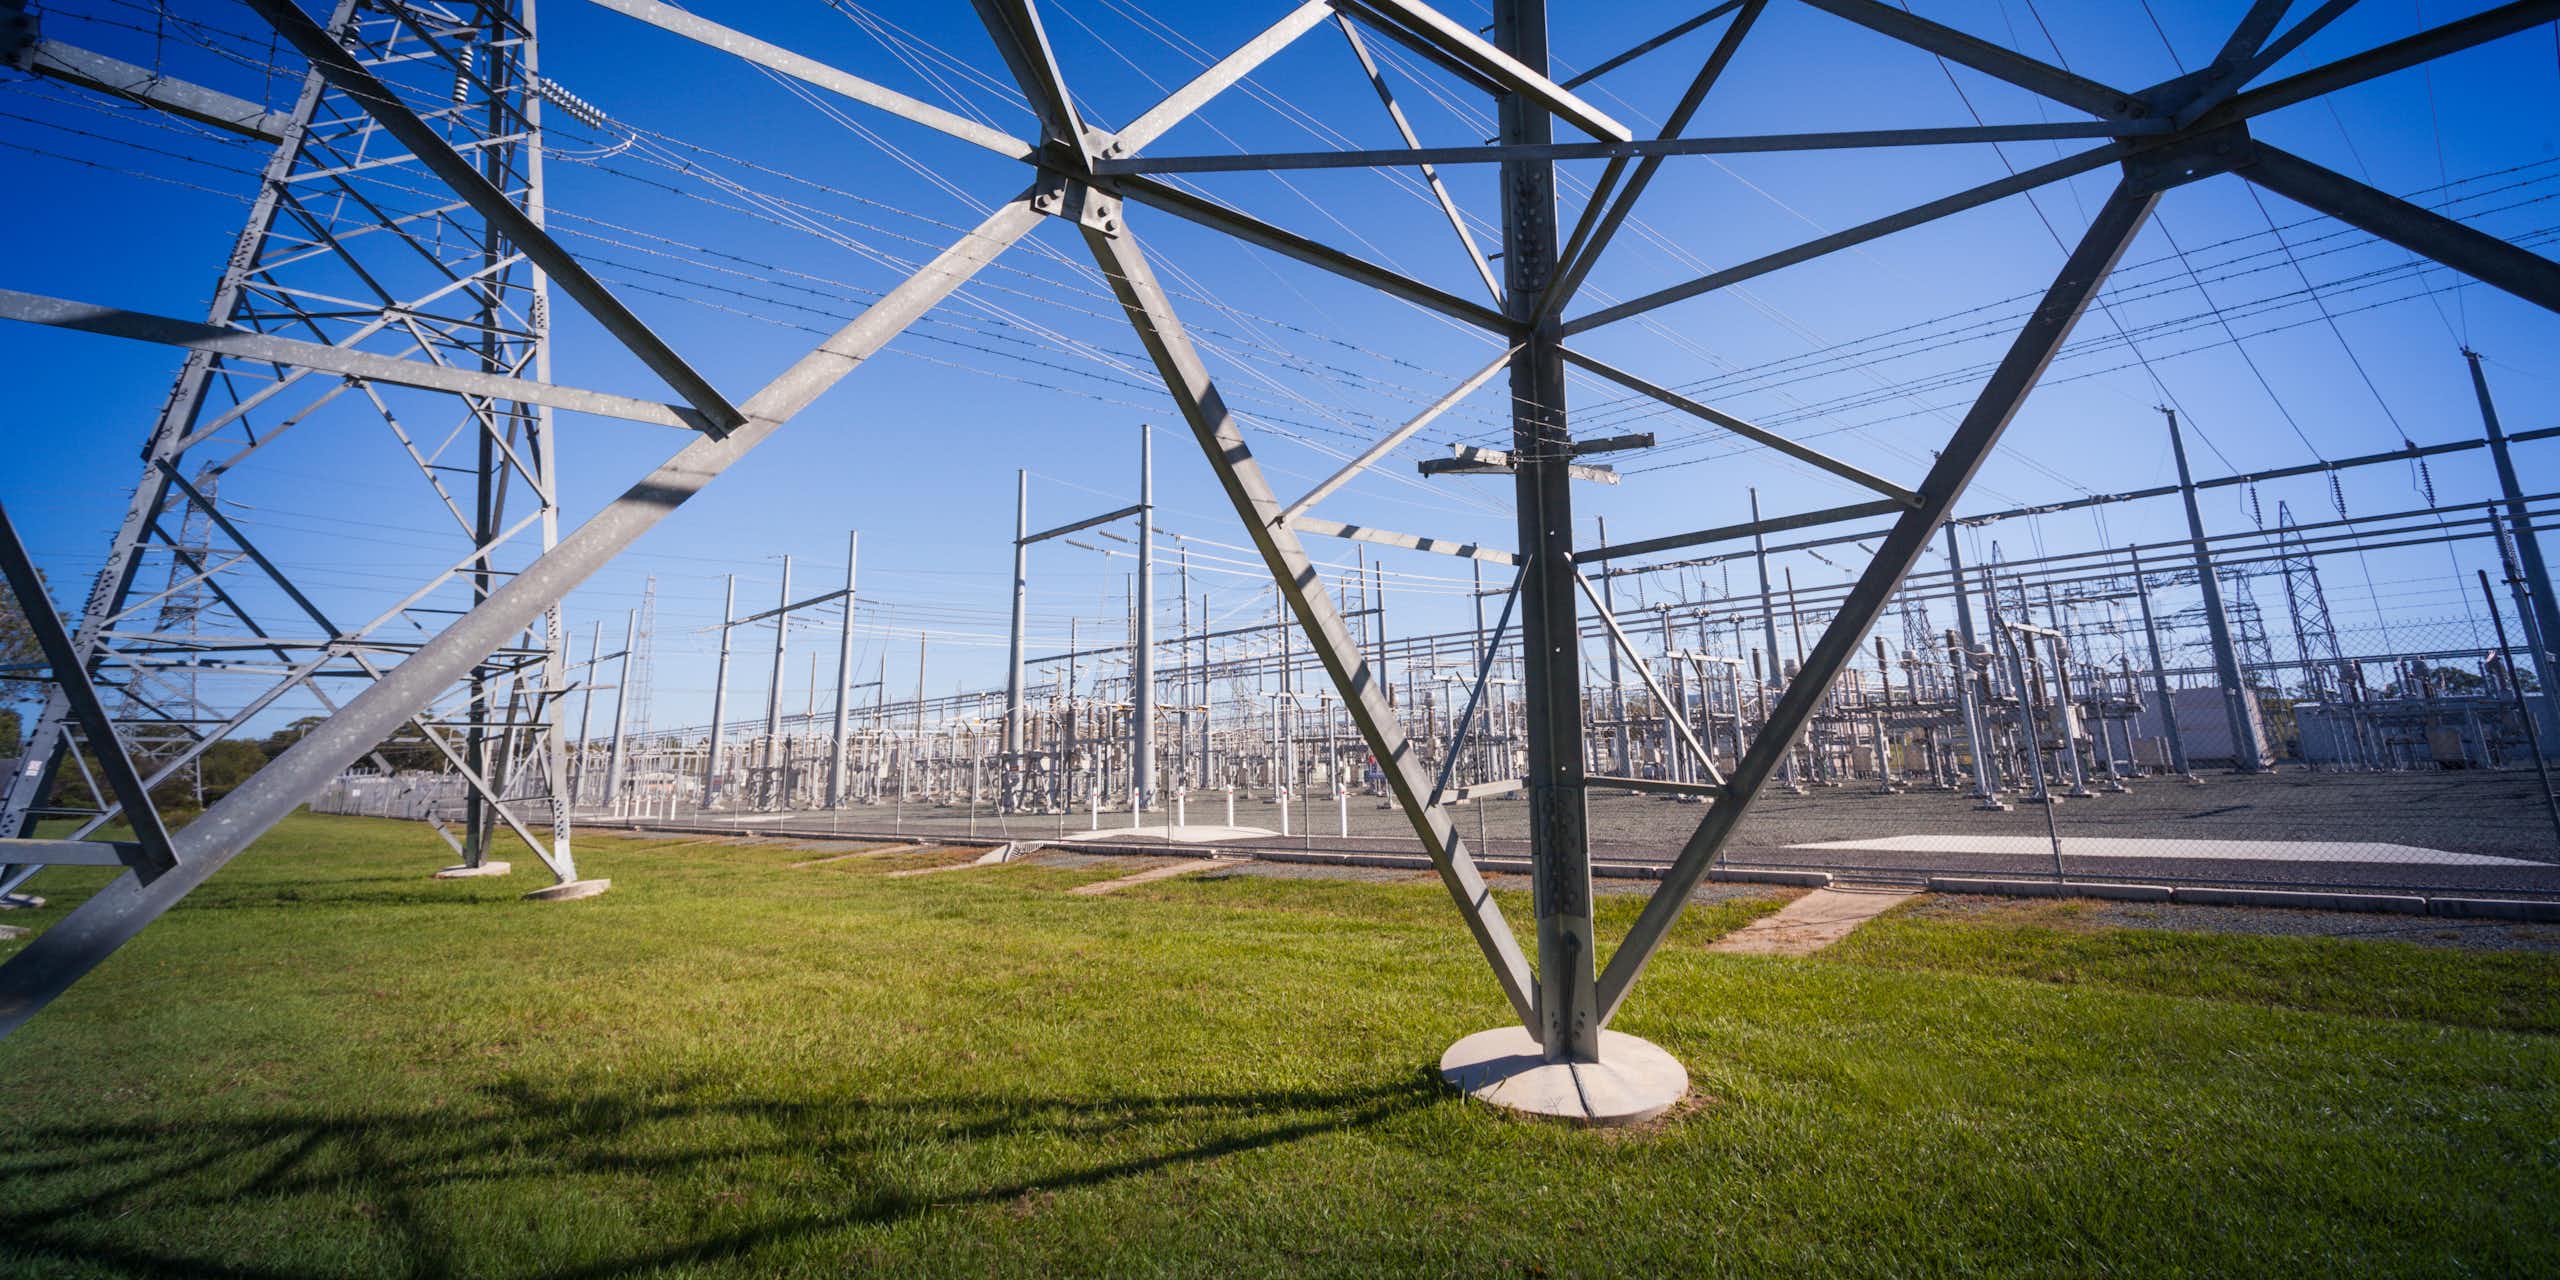 Peering through the metal structure of an electricity pylon into a power substation in Queensland, standing on green grass with a blue sky in the background